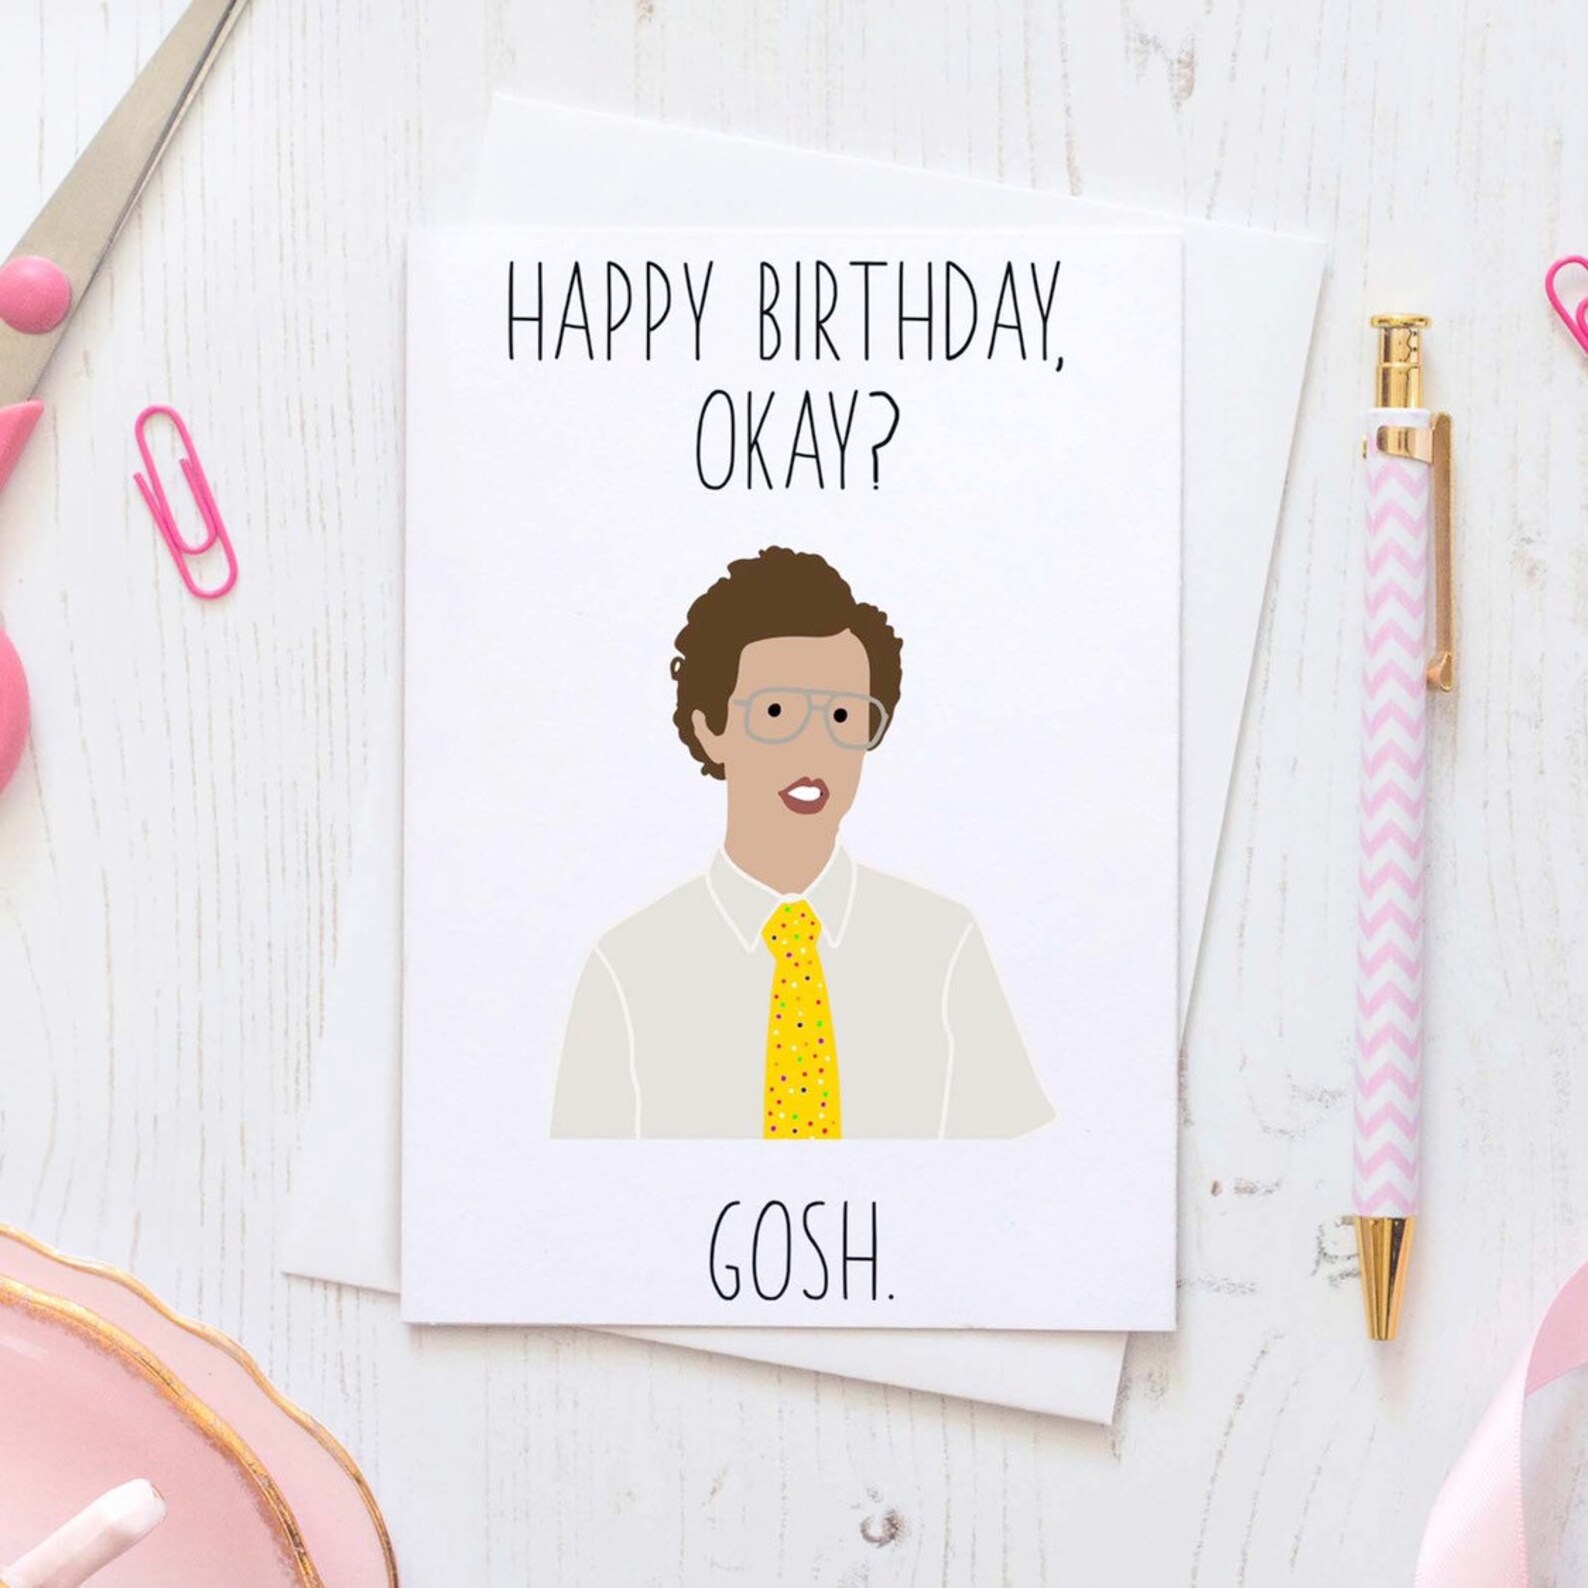 Birthday wishes for Napoleon Dynamite fans.